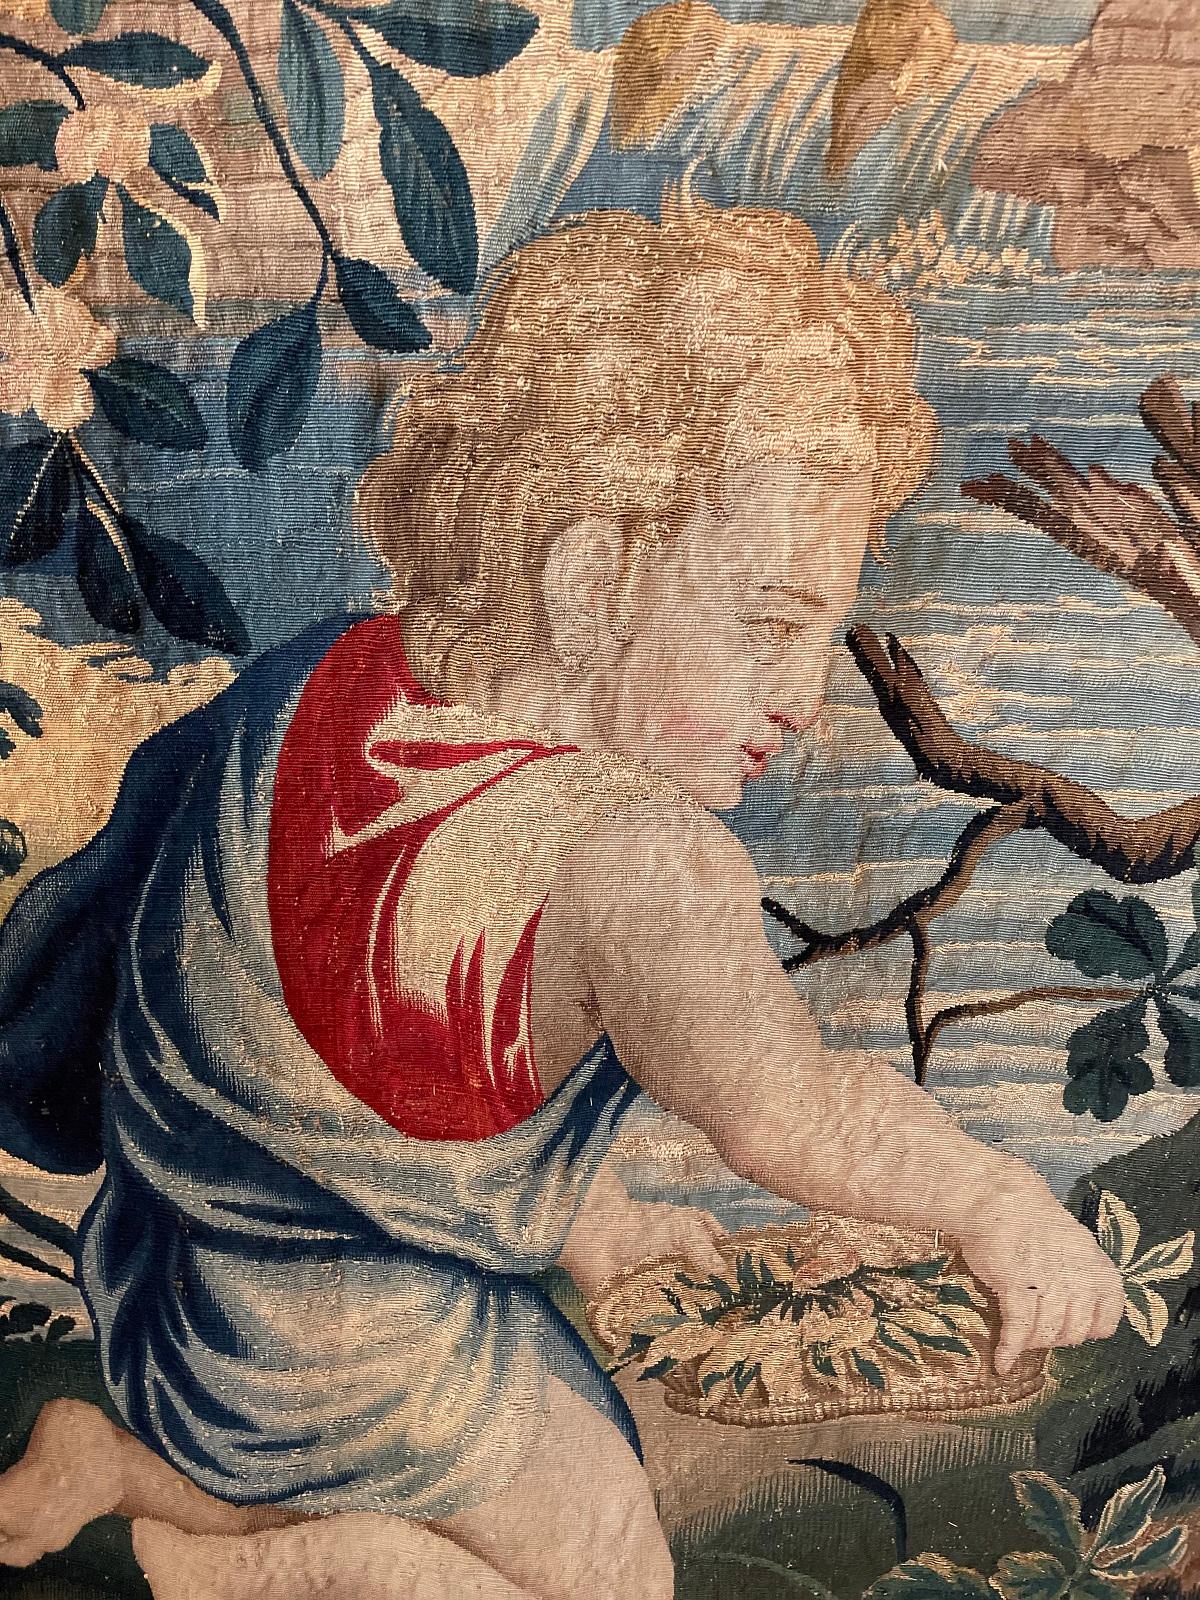 European Brussels Tapestry from the 17th Century, Quarter of Point